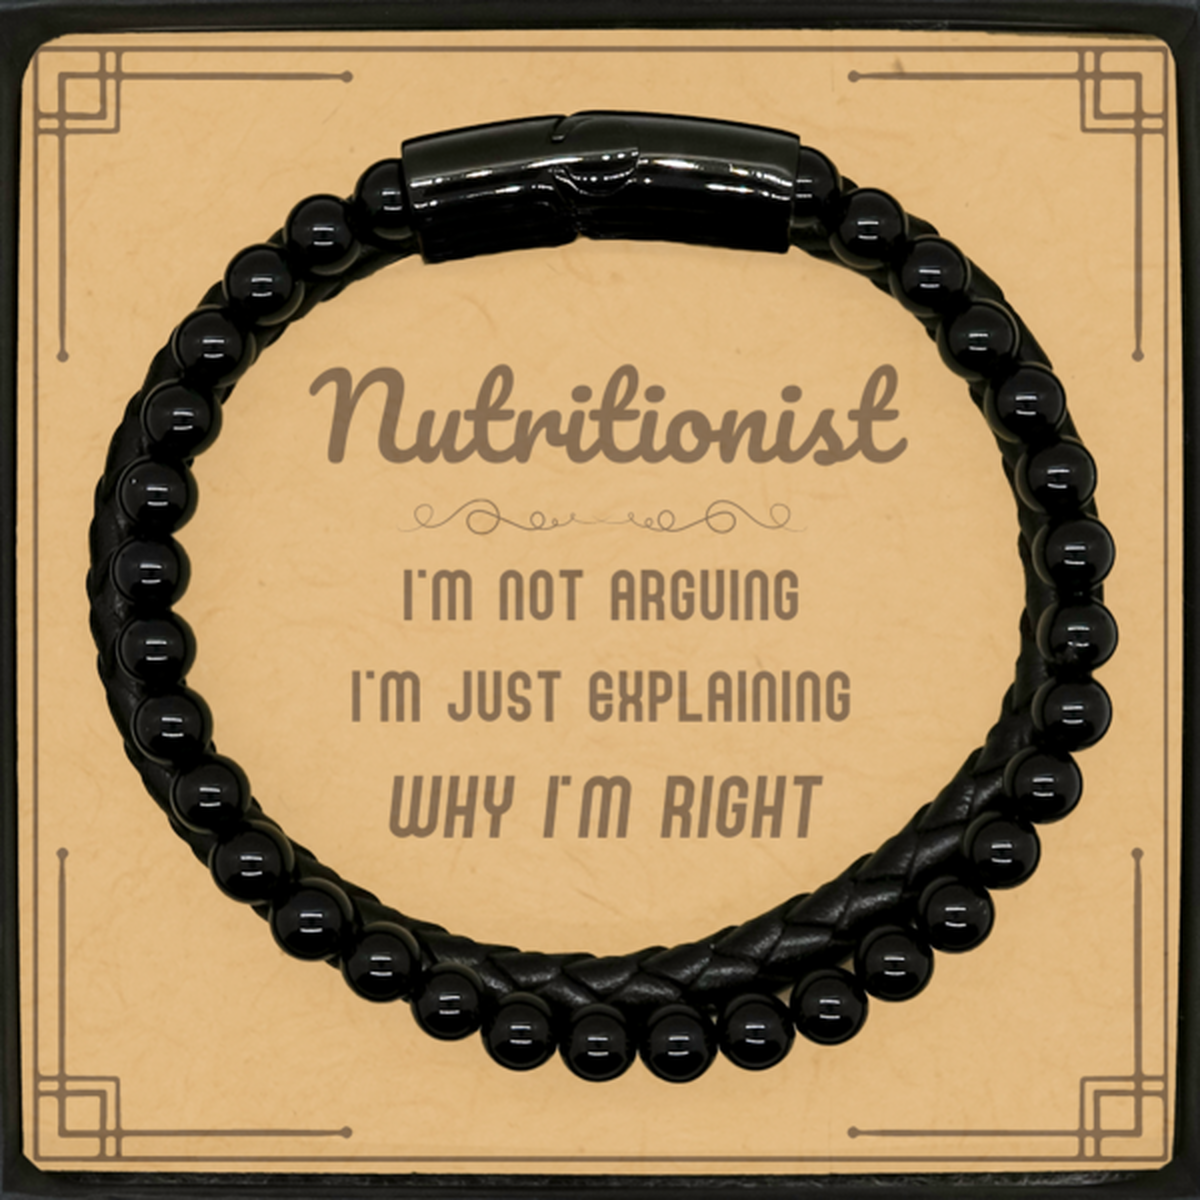 Nutritionist I'm not Arguing. I'm Just Explaining Why I'm RIGHT Stone Leather Bracelets, Funny Saying Quote Nutritionist Gifts For Nutritionist Message Card Graduation Birthday Christmas Gifts for Men Women Coworker